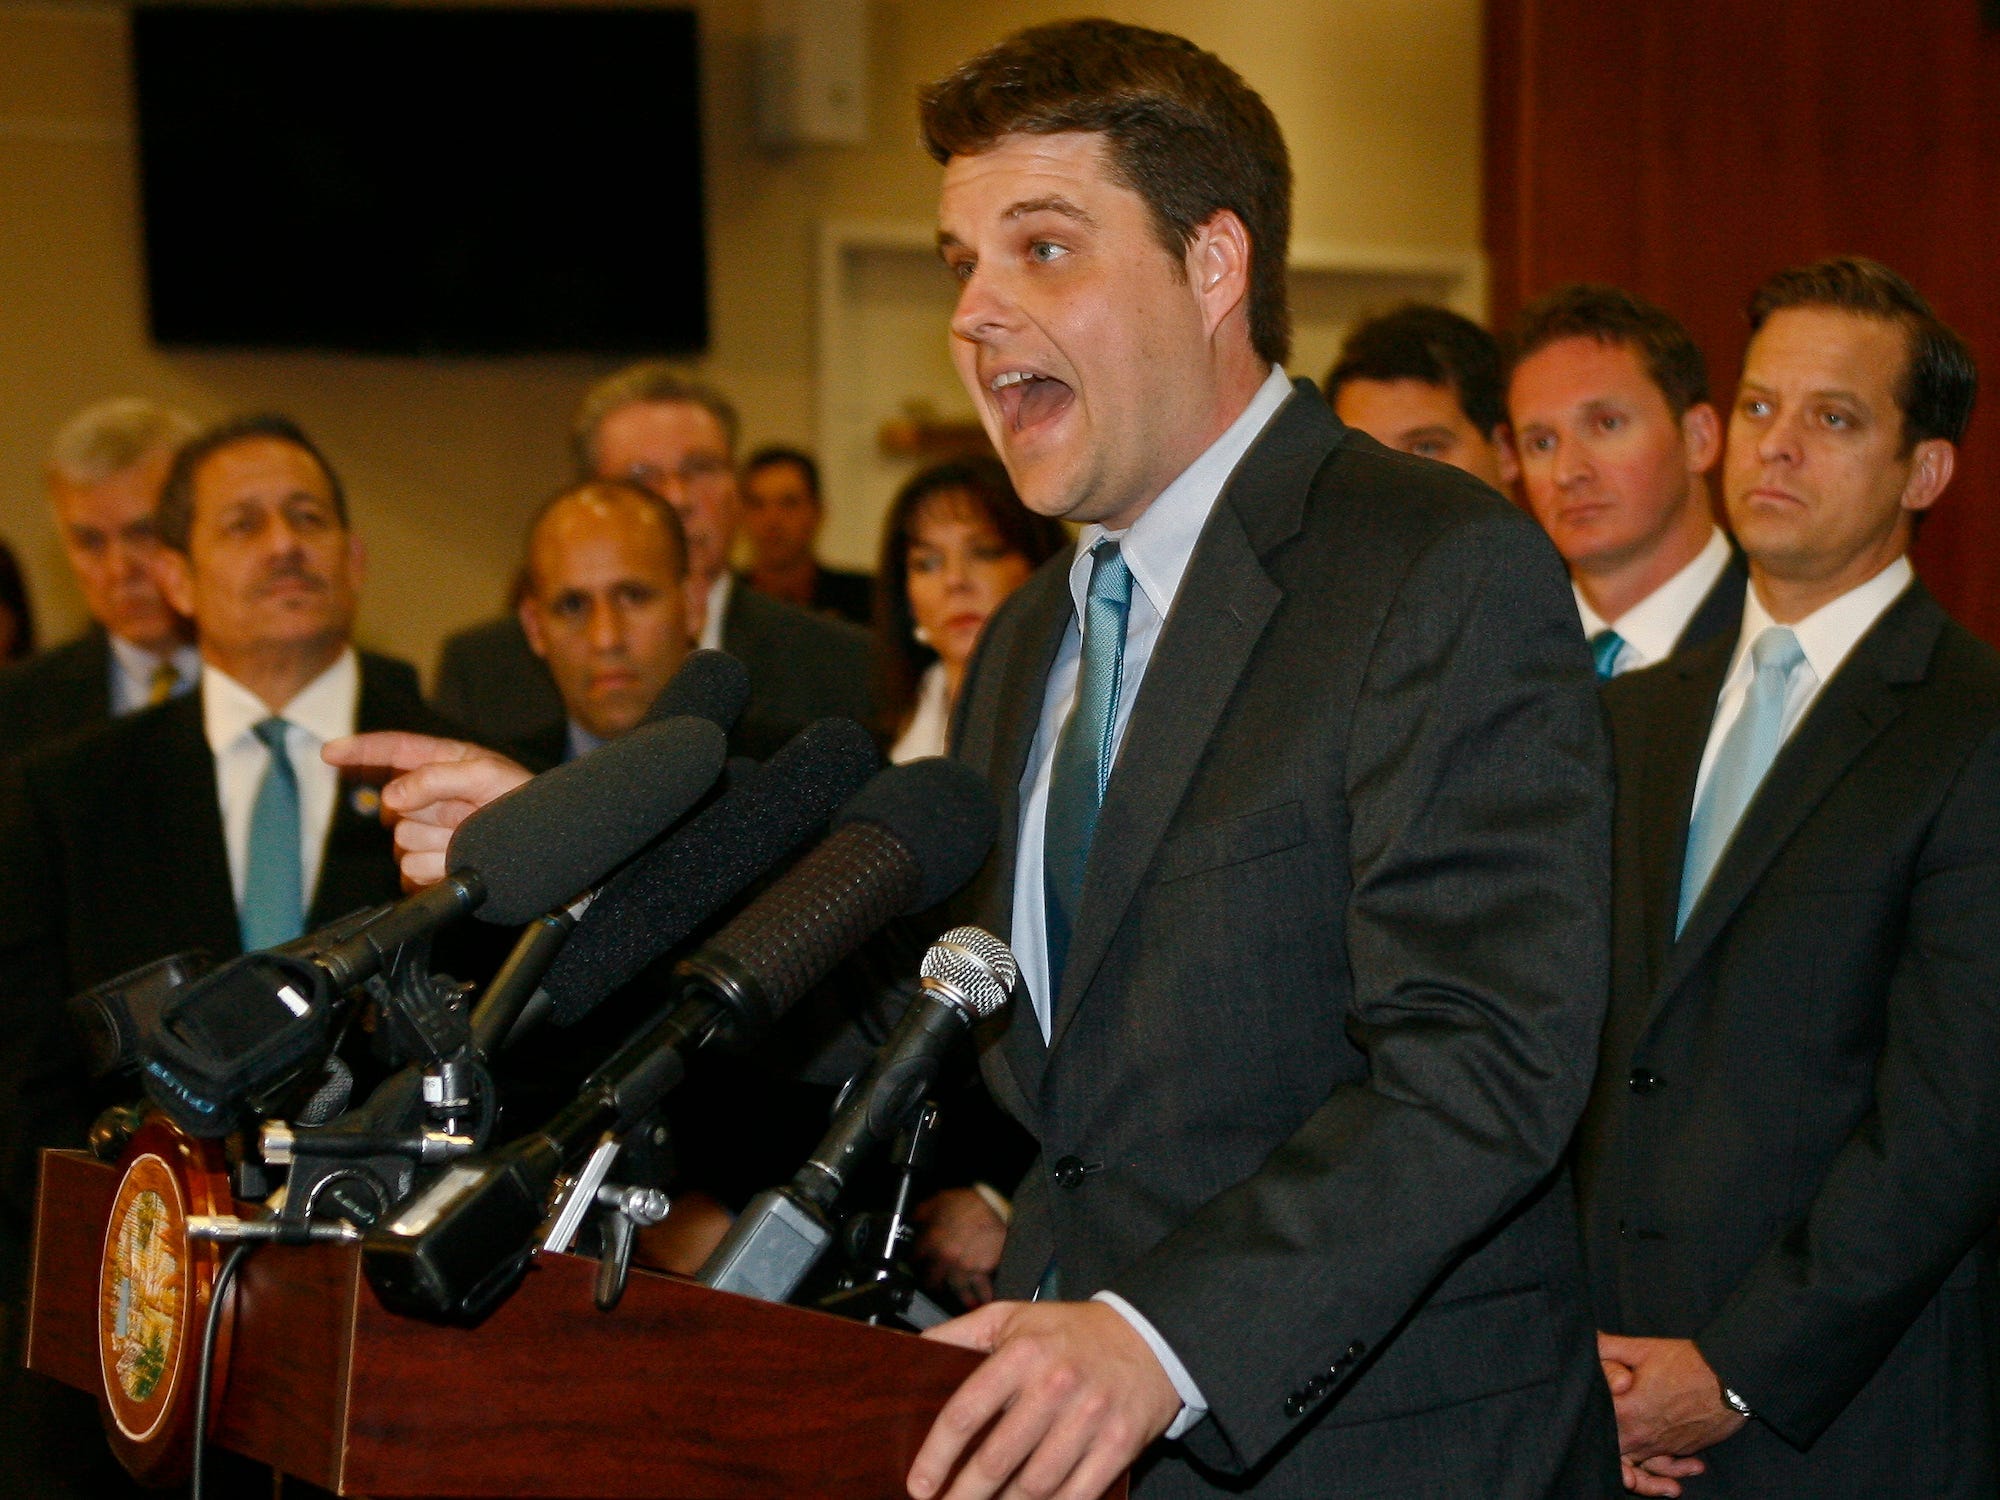 Rep. Matt Gaetz, R-Fort Walton Beach, speaks of a "scorched earth" policy towards child sexual predators Tuesday April 1, 2014, in the Capitol in Tallahassee, Fla. Florida Gov. Rick Scott signed a group of bills that will require sexual predators to be locked up longer, and require that more sexual predators be committed for psychiatric review once they finish their criminal sentences. (AP Photo/Phil Sears)